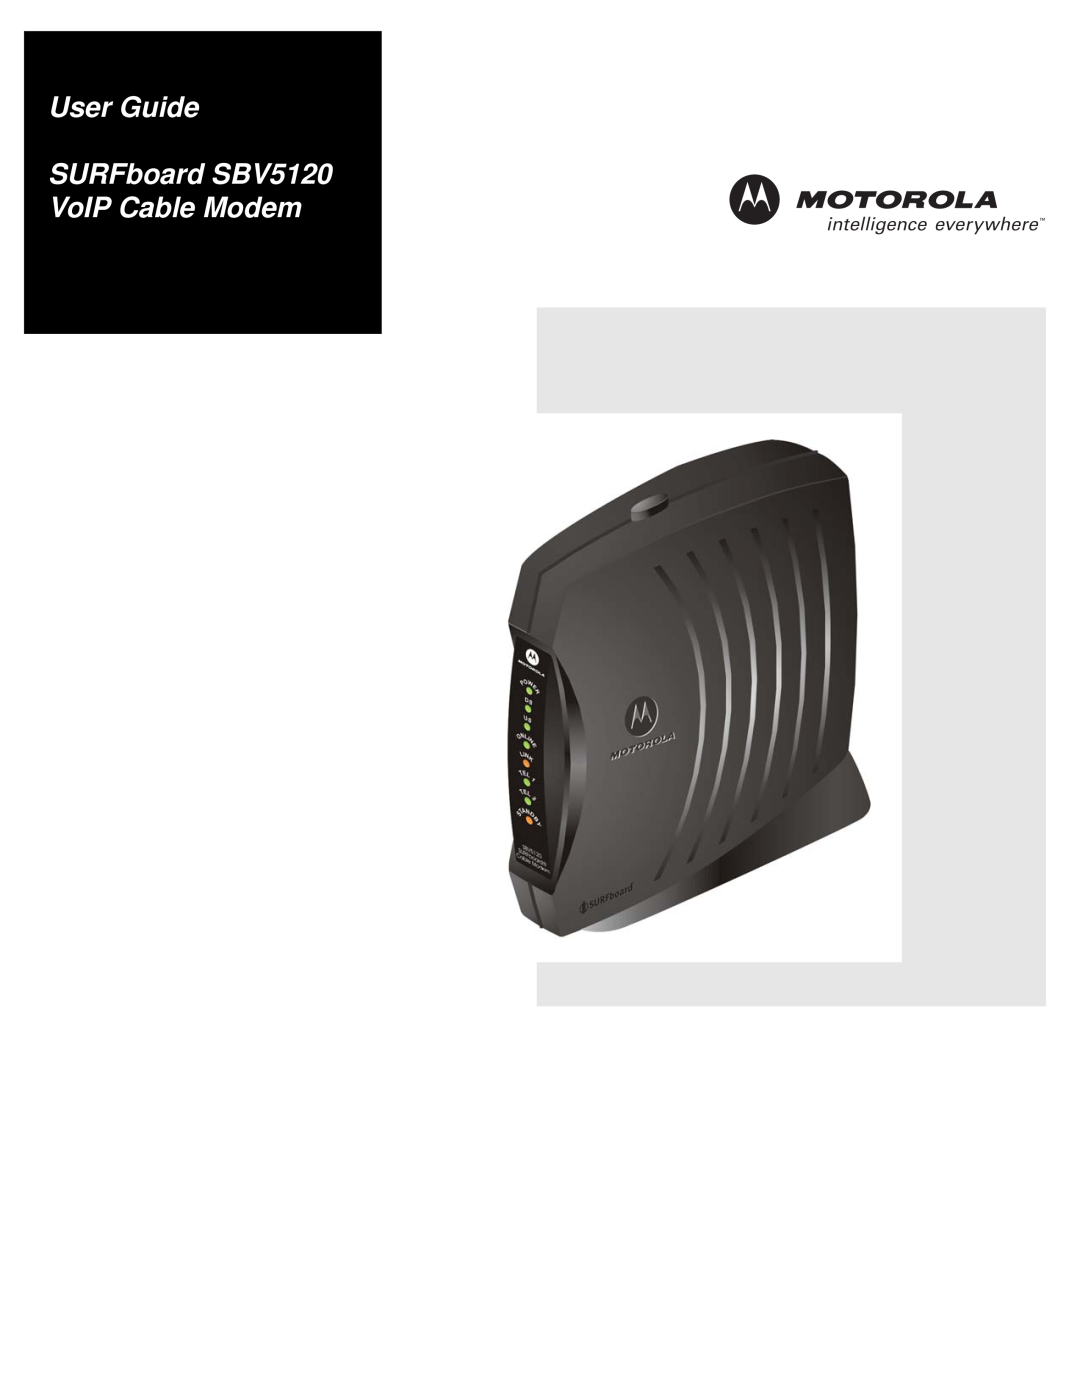 Motorola manual User Guide SURFboard SBV5120 VoIP Cable Modem 